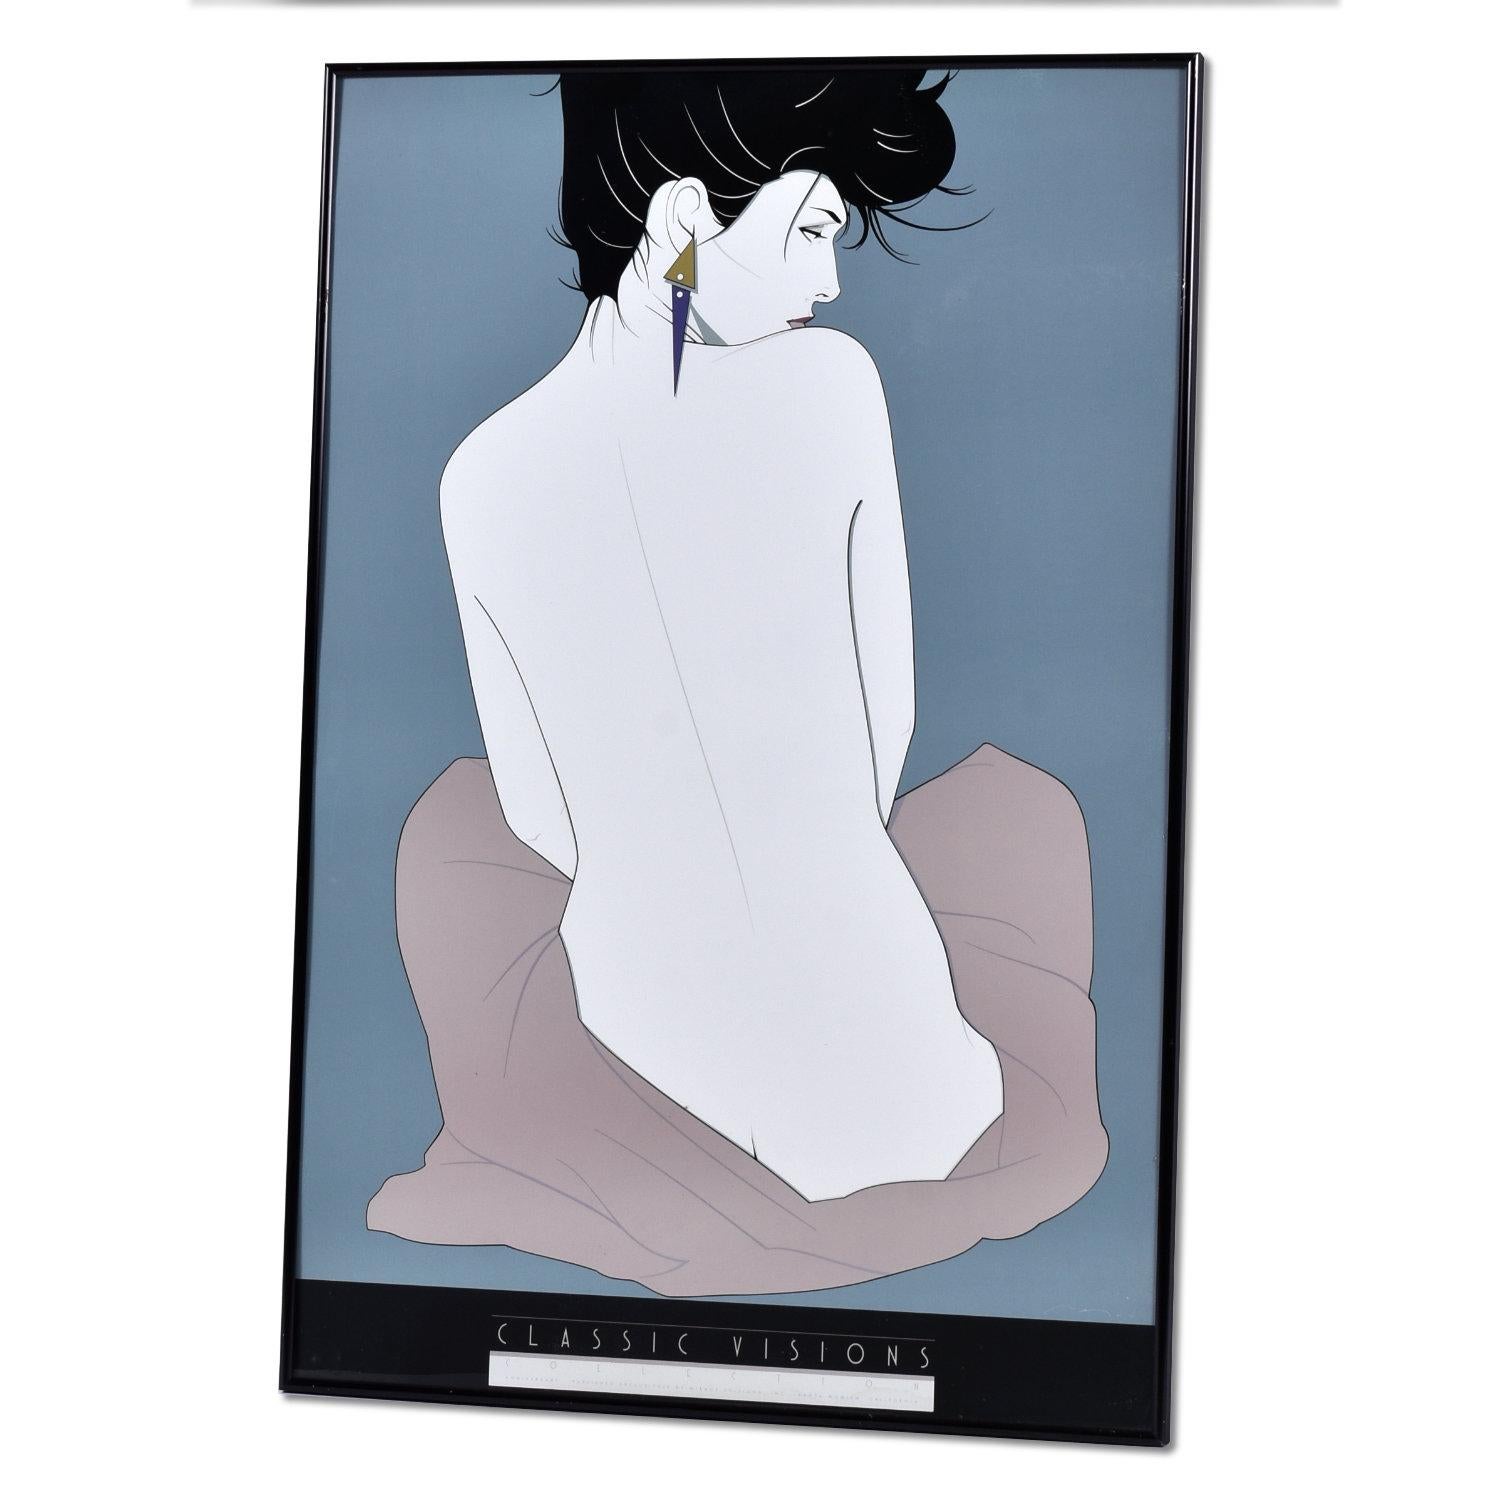 American Pair of Patrick Nagel Framed Prints Portfolio 1 and Classic Visions For Sale